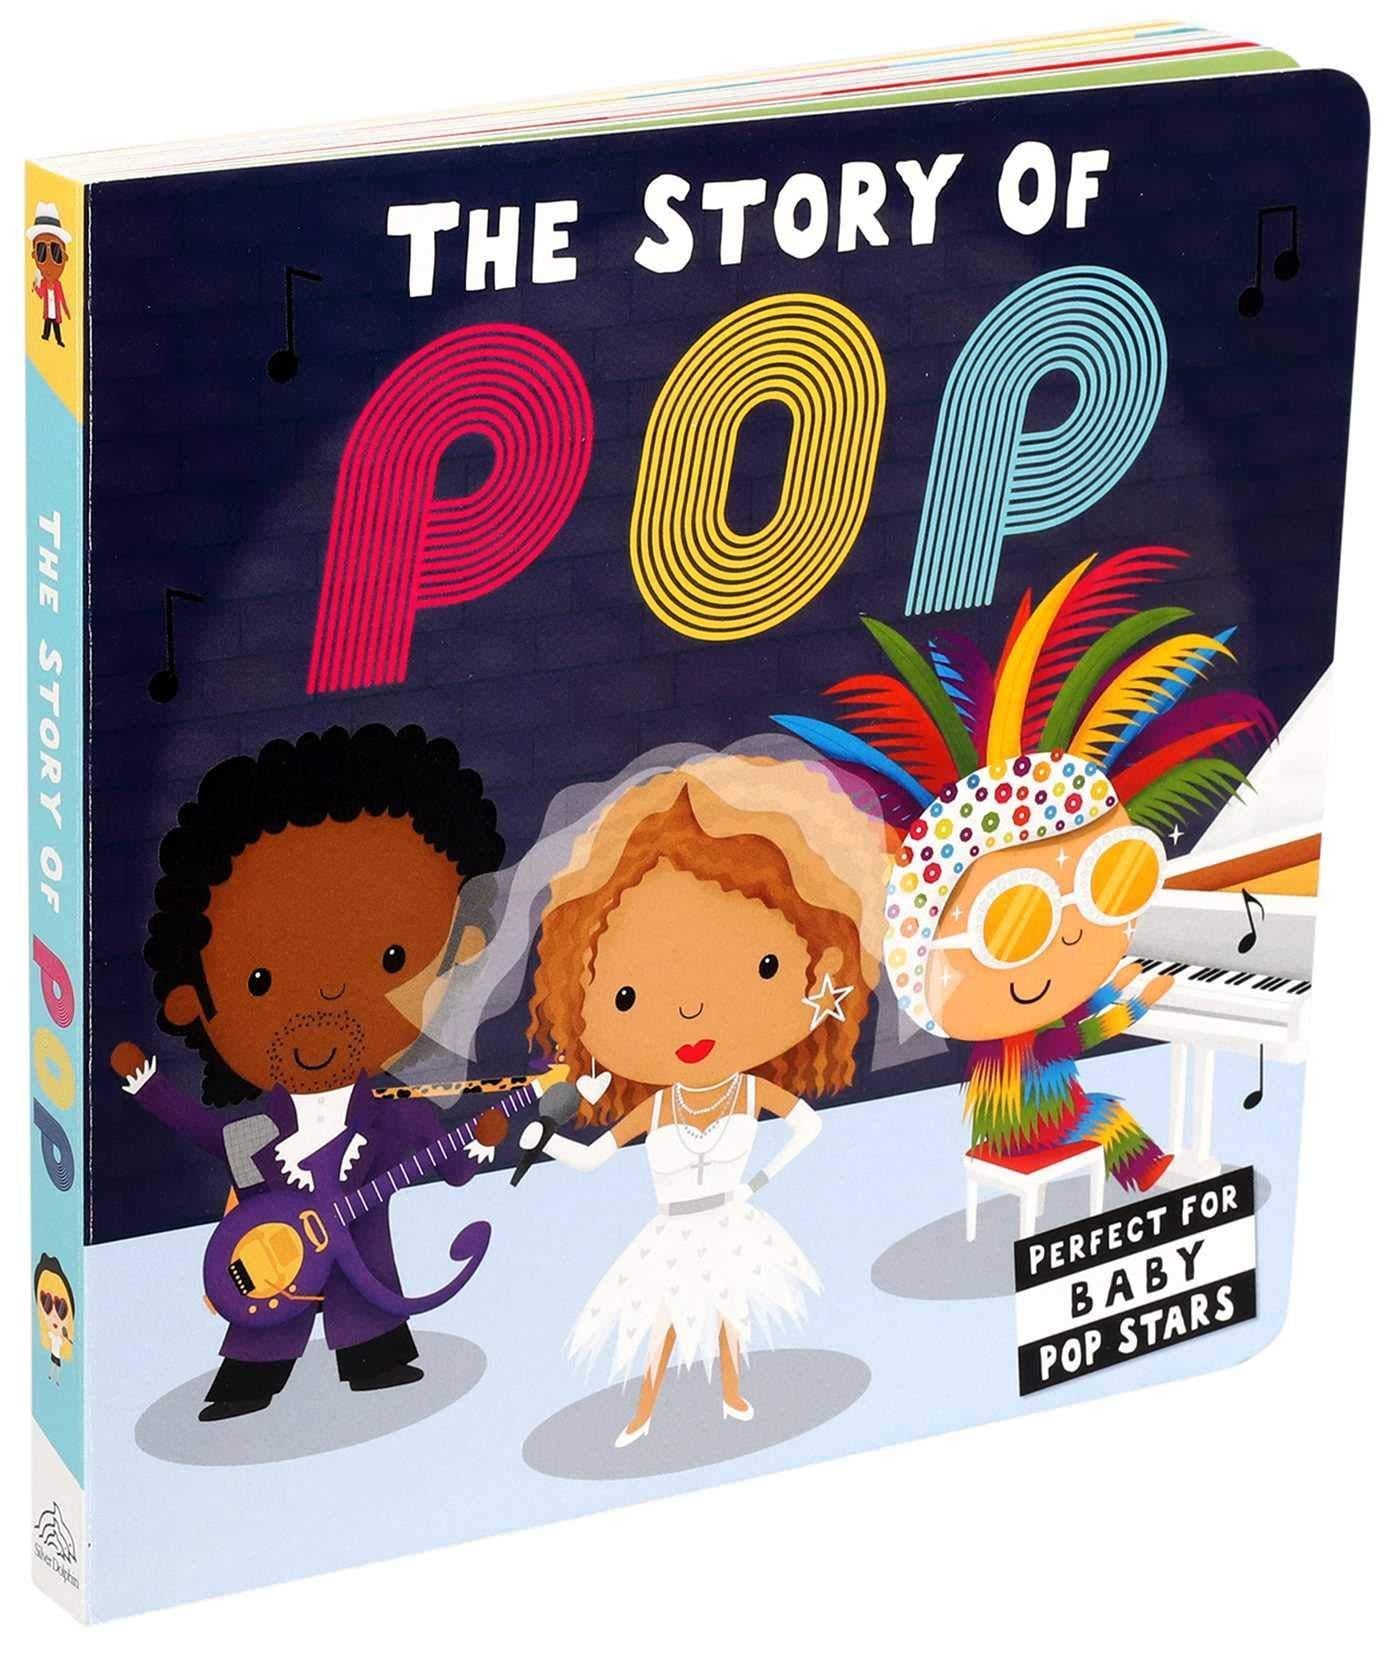 THE STORY OF POP - BOOK